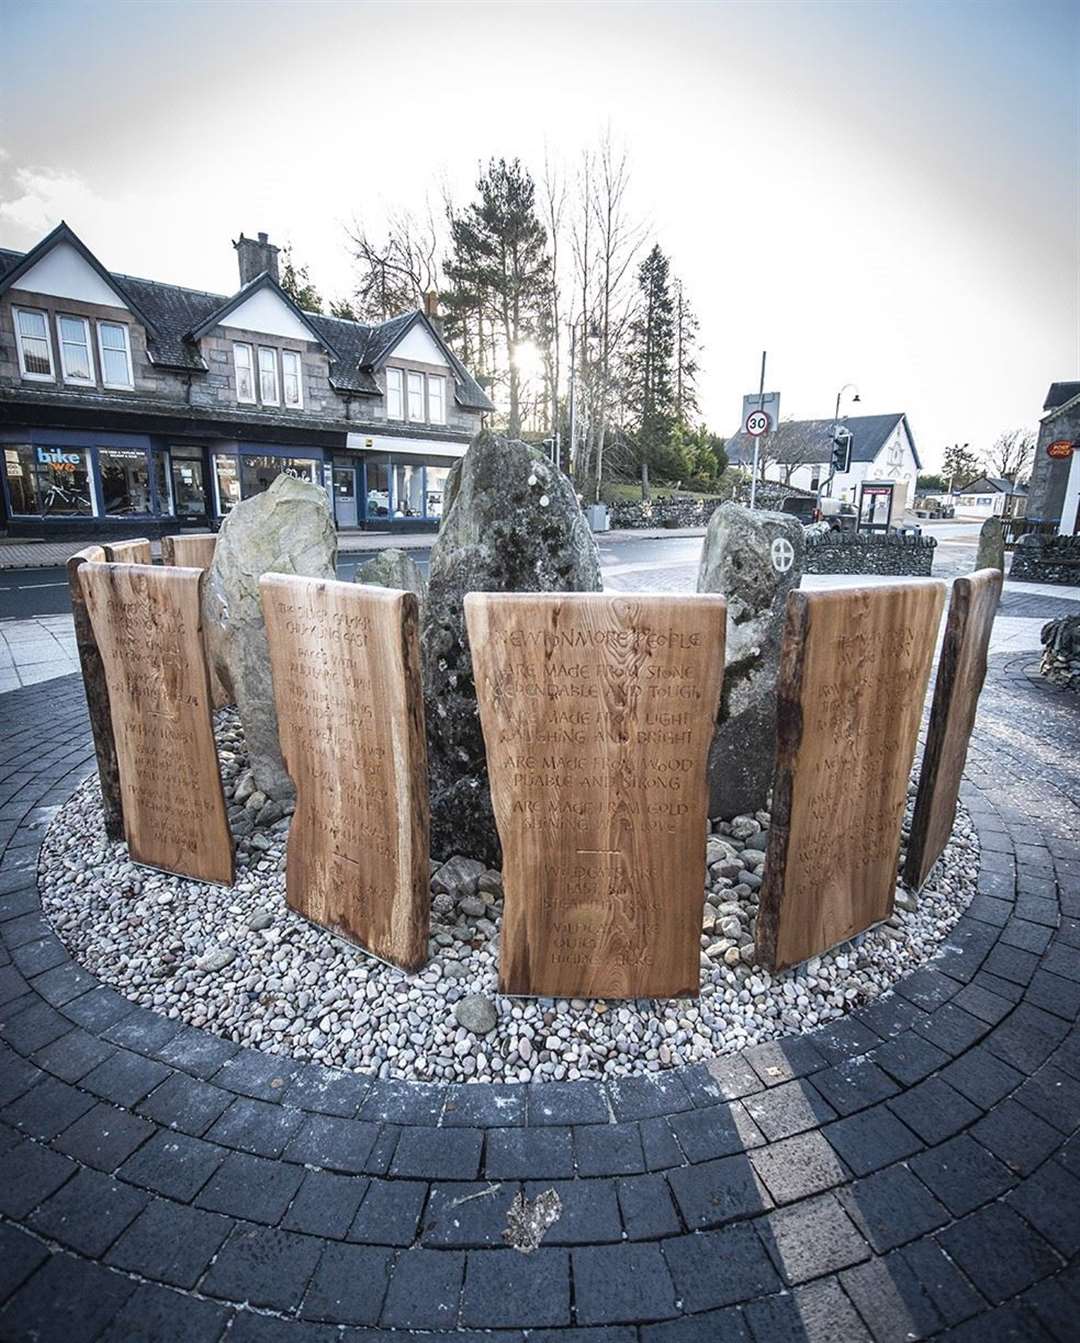 Newtonmore's famous art installation project, officially 